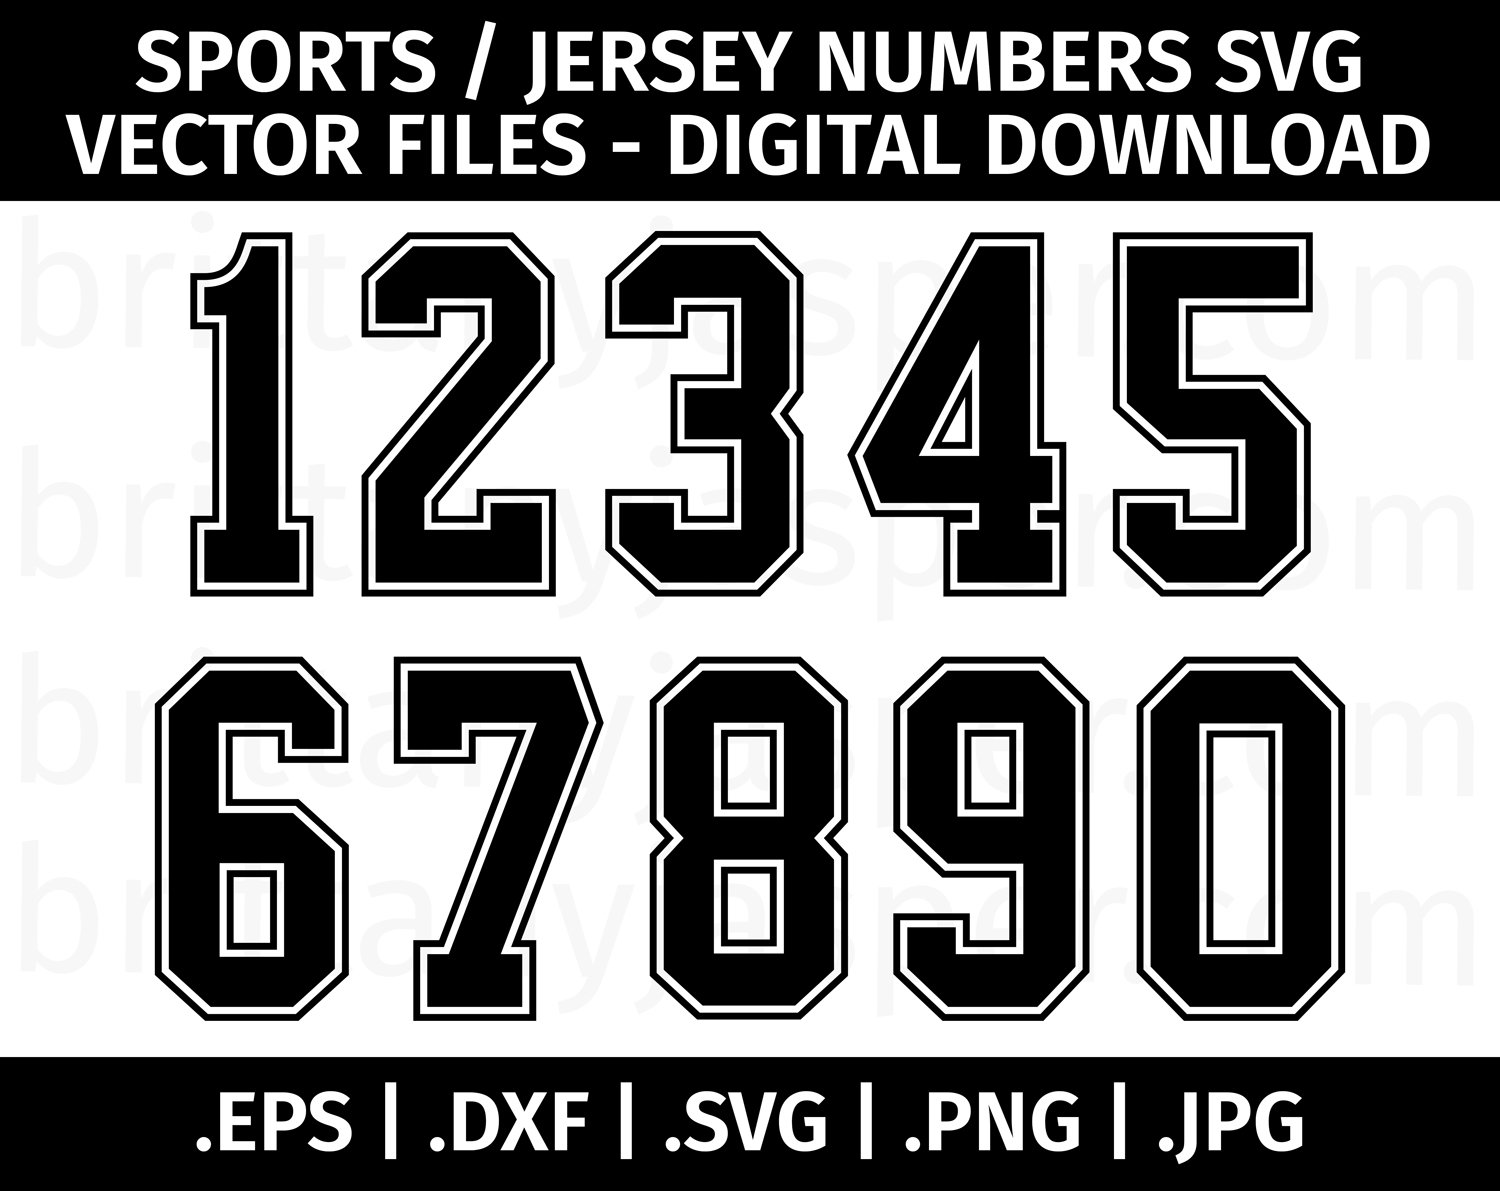 Scrapbooking Clip Art & Image Files Dxf Eps Numbers Clipart /Svg Png ...